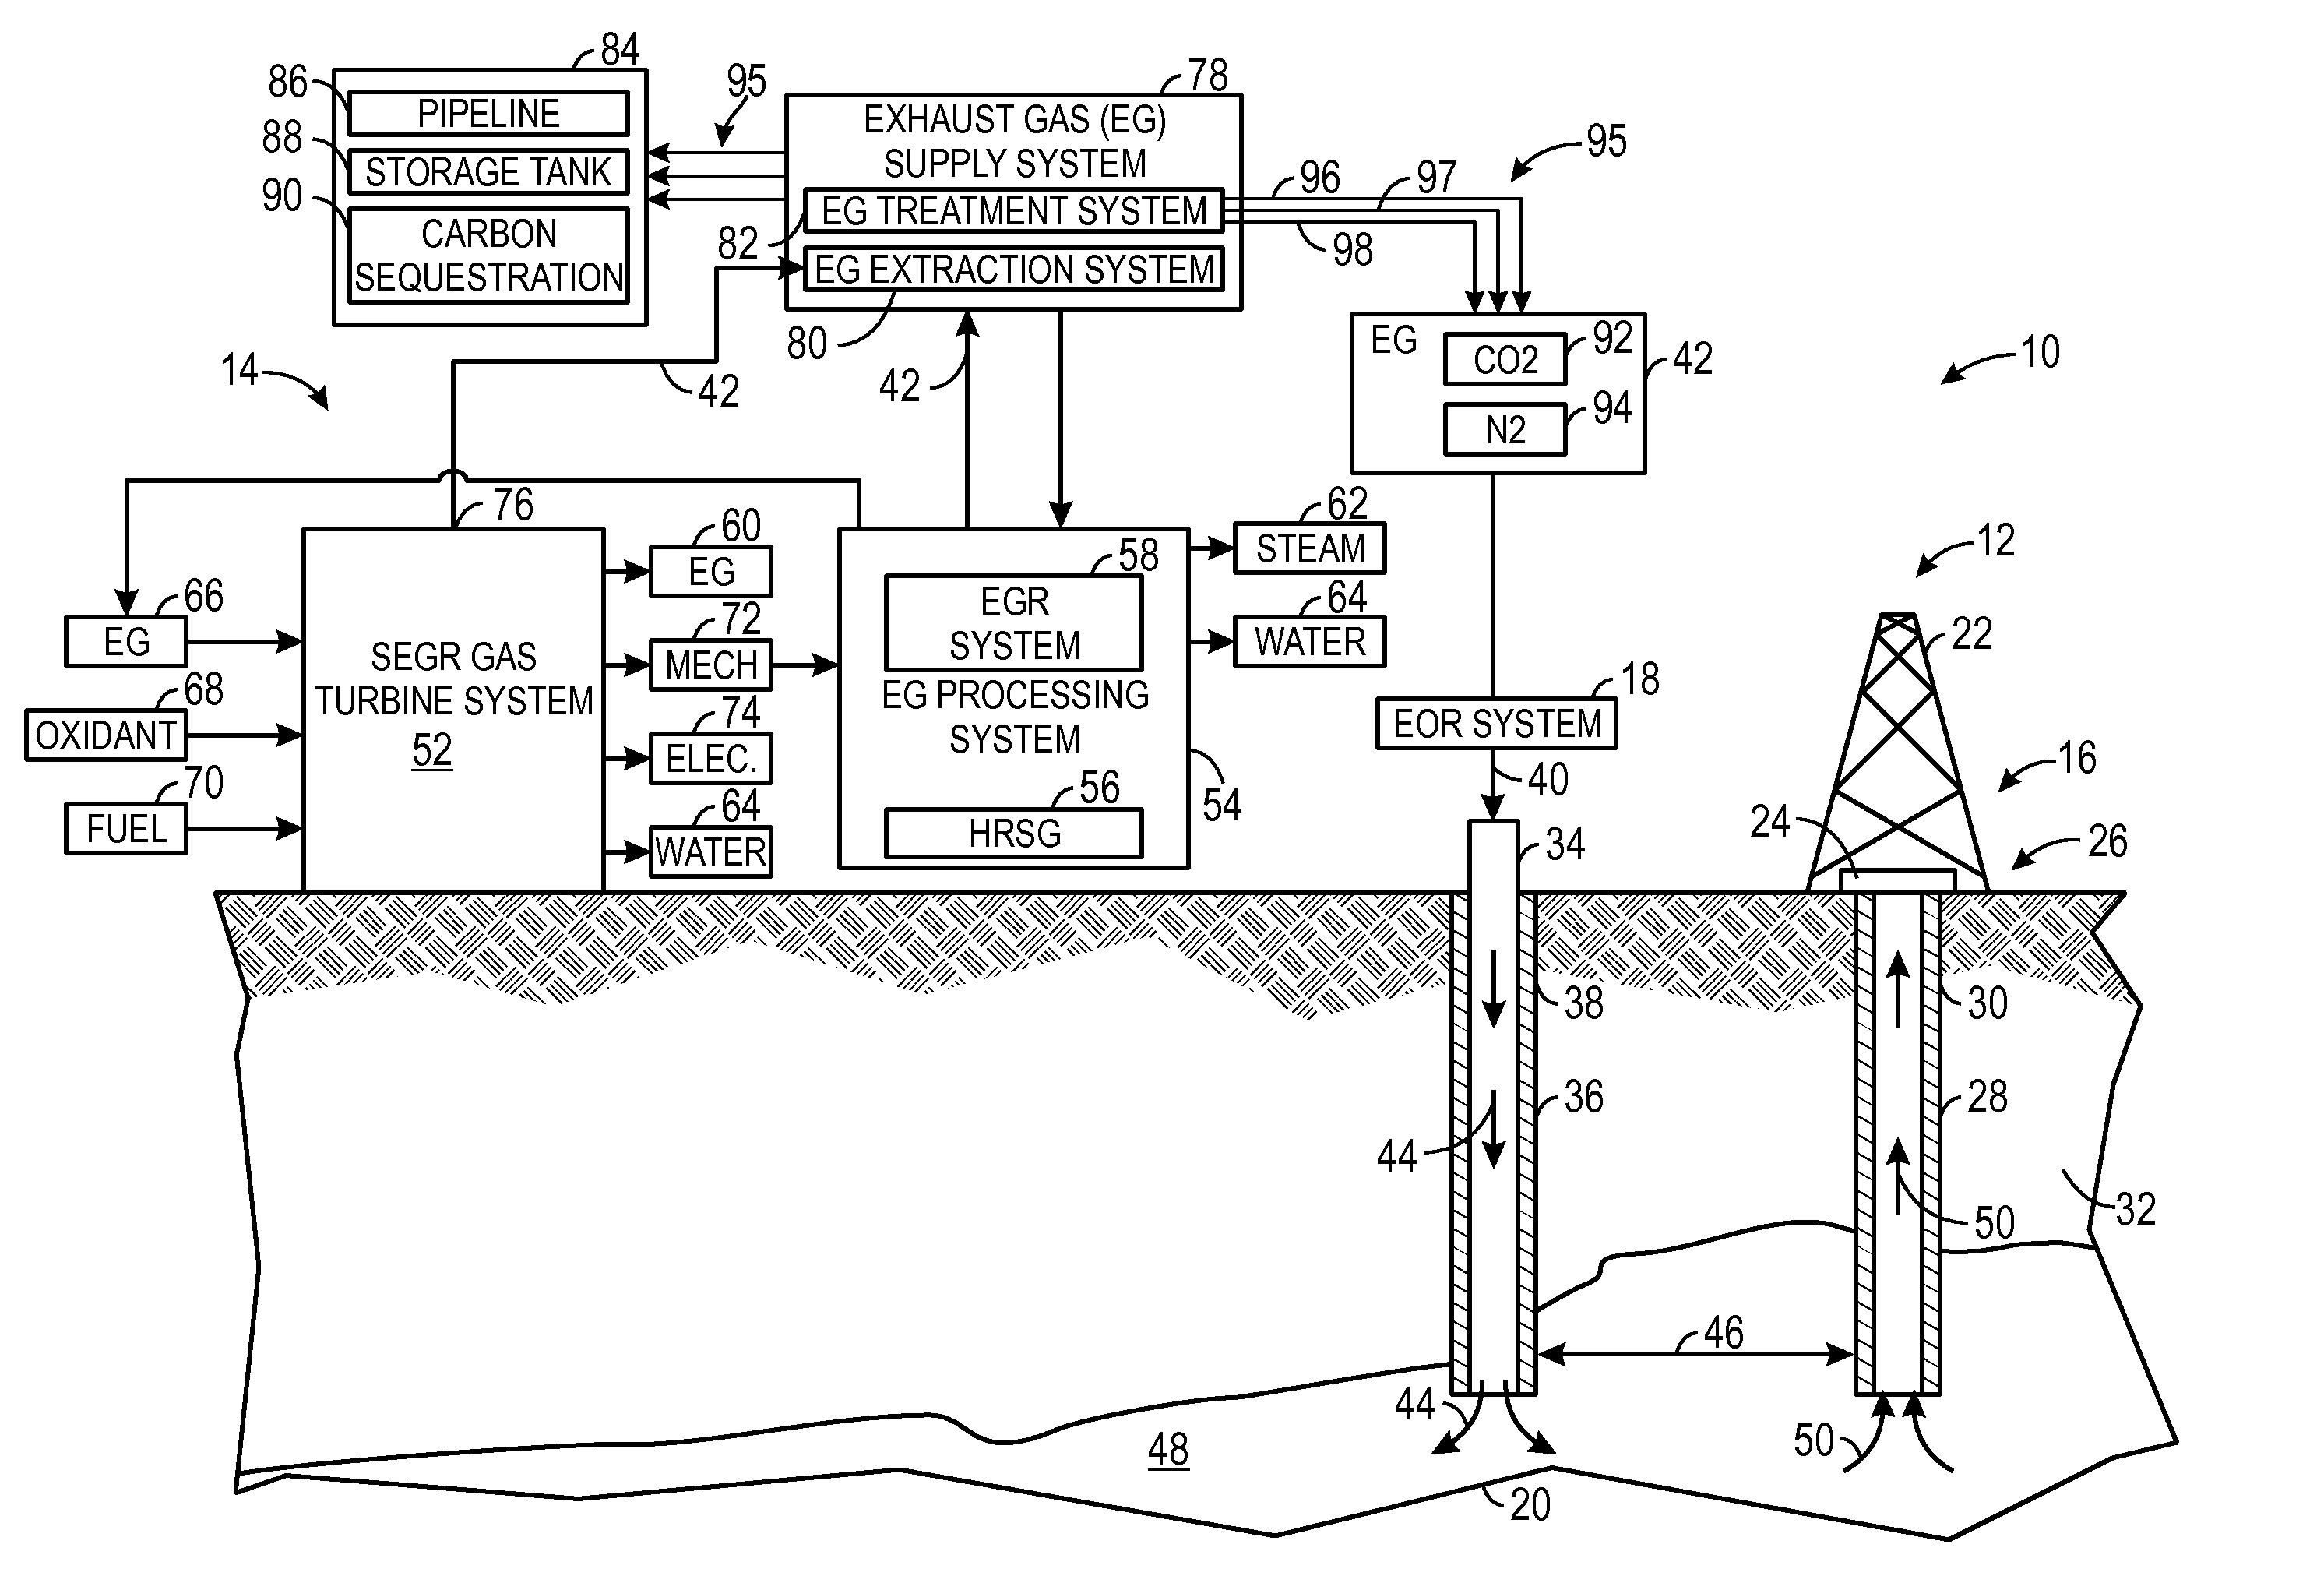 System and method for diffusion combustion with oxidant-diluent mixing in a stoichiometric exhaust gas recirculation gas turbine system